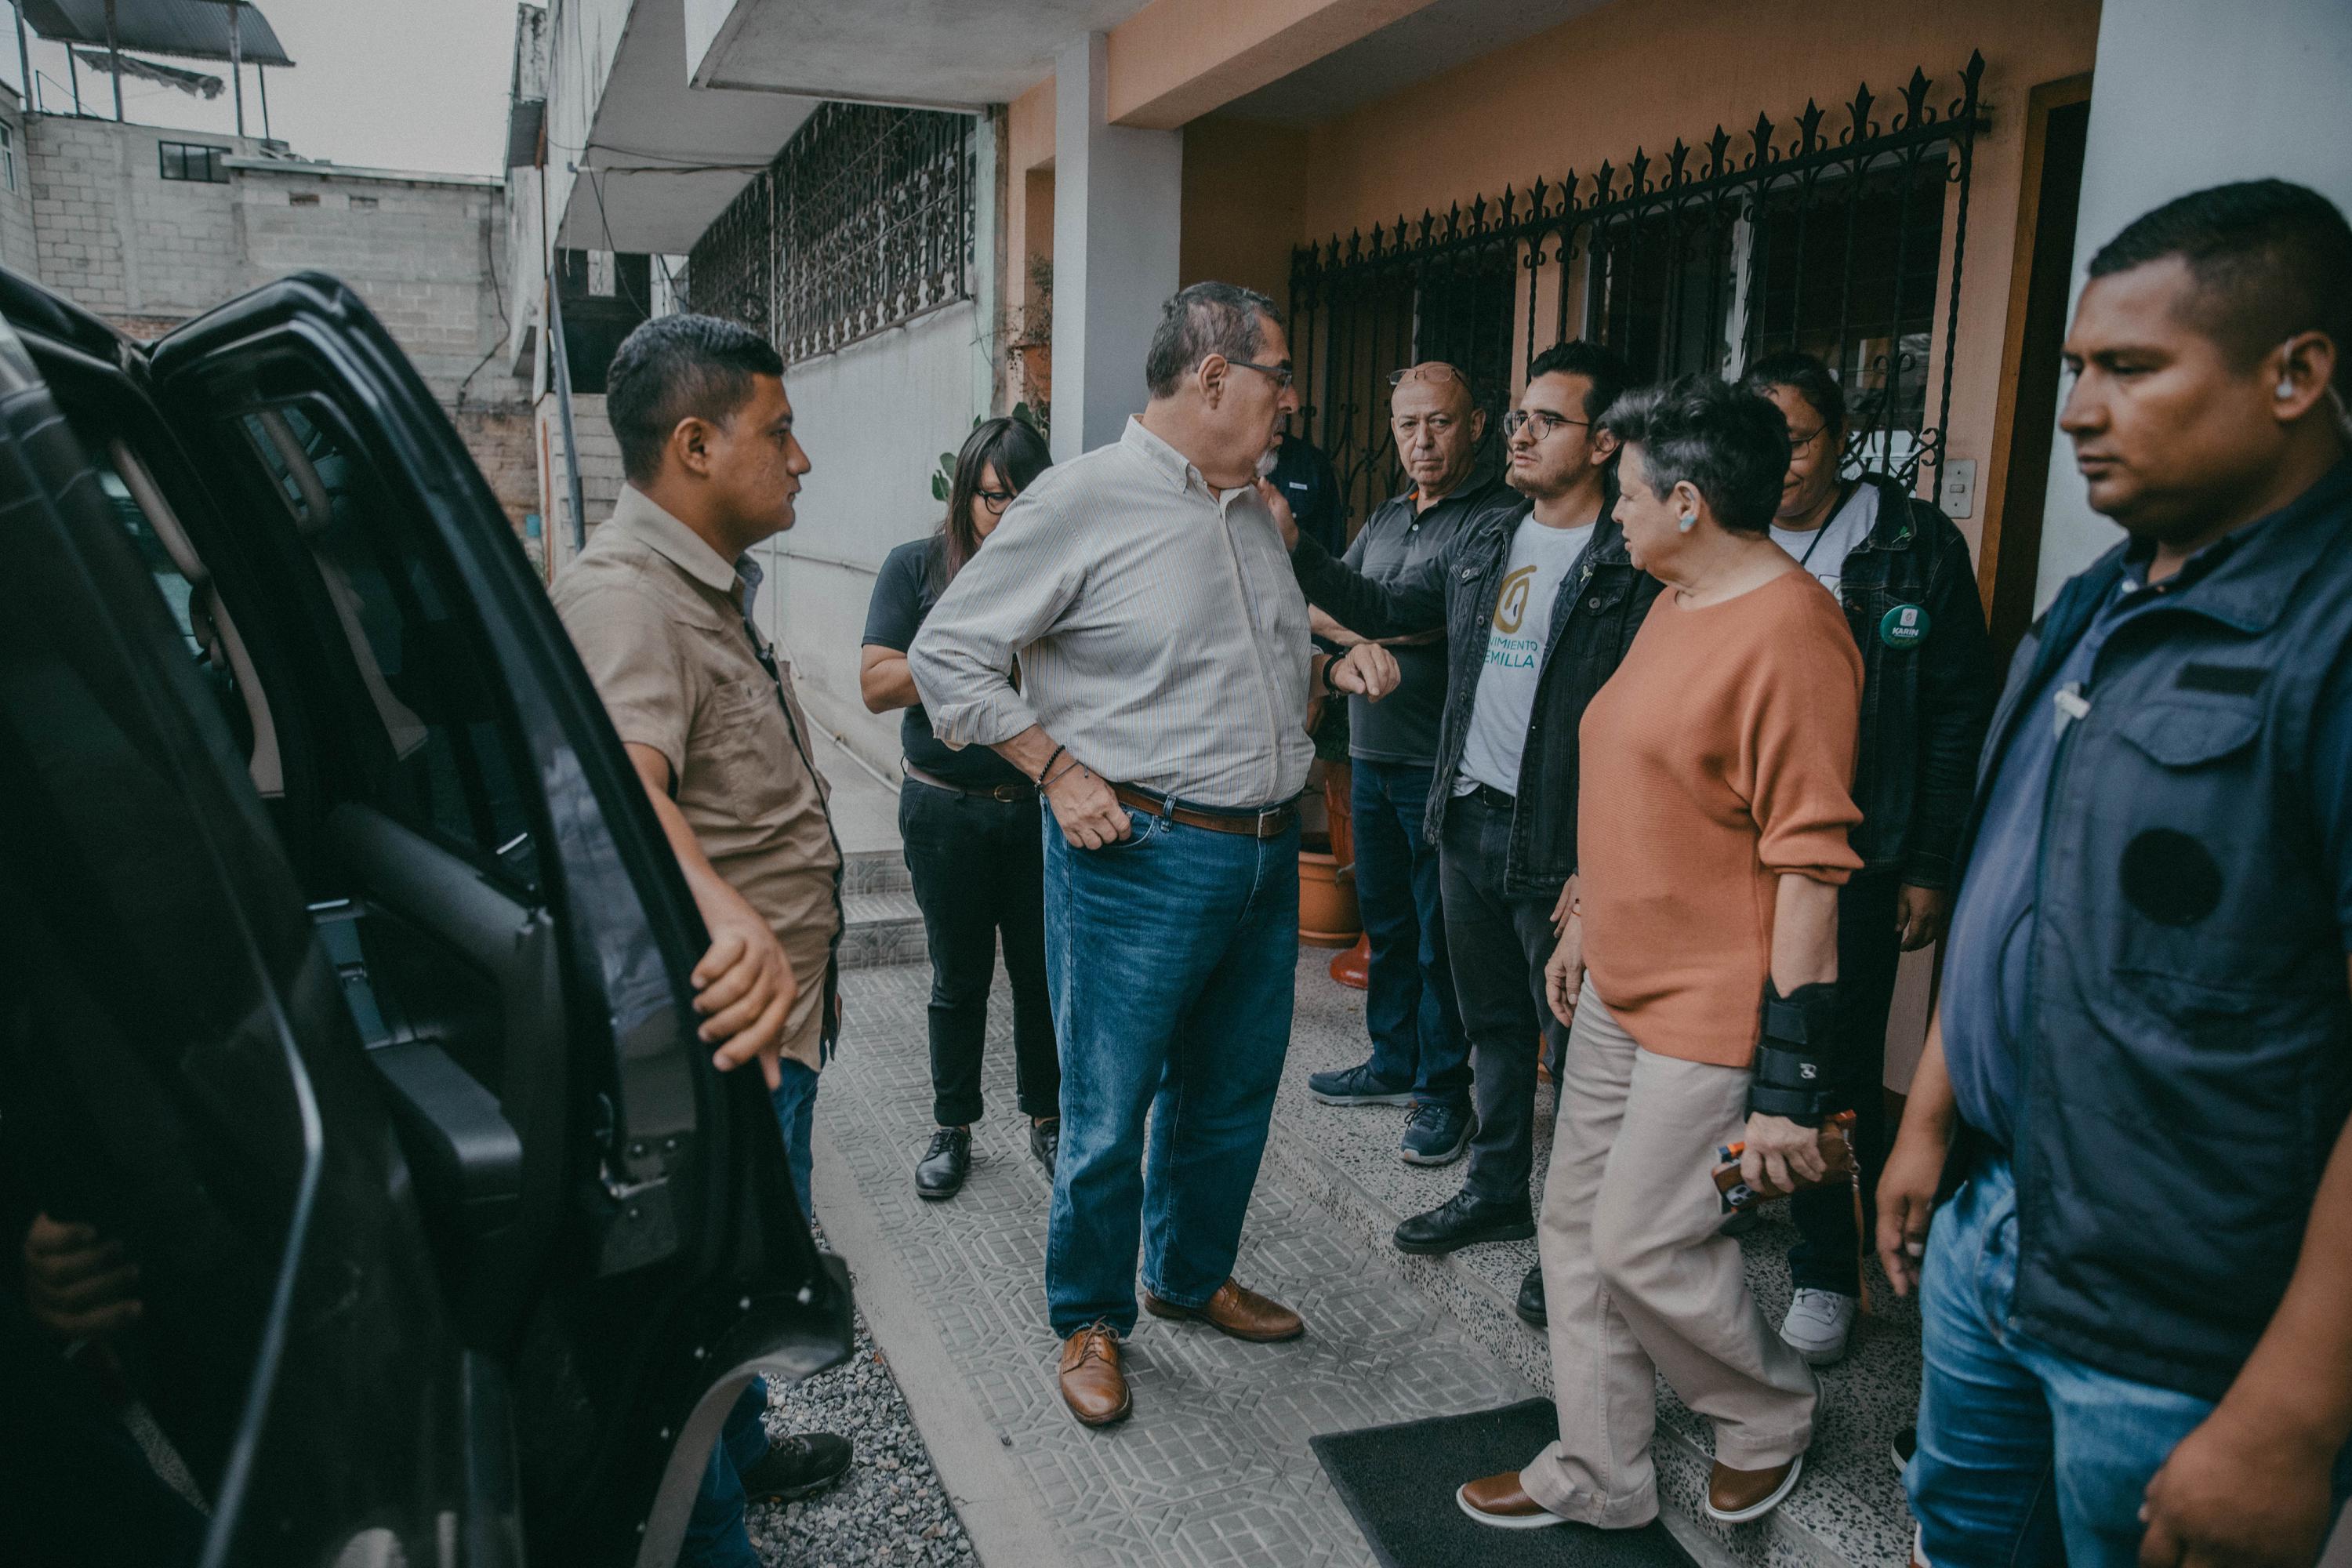 Bernardo Arévalo talks with his campaign manager, political scientist Justo Pérez, after a private conversation with Cardinal Álvaro Ramazzini at the offices of the Huehuetenango Diocese on Friday, August 11. In late July, Ramazzini publicly called for forming a nationwide citizen